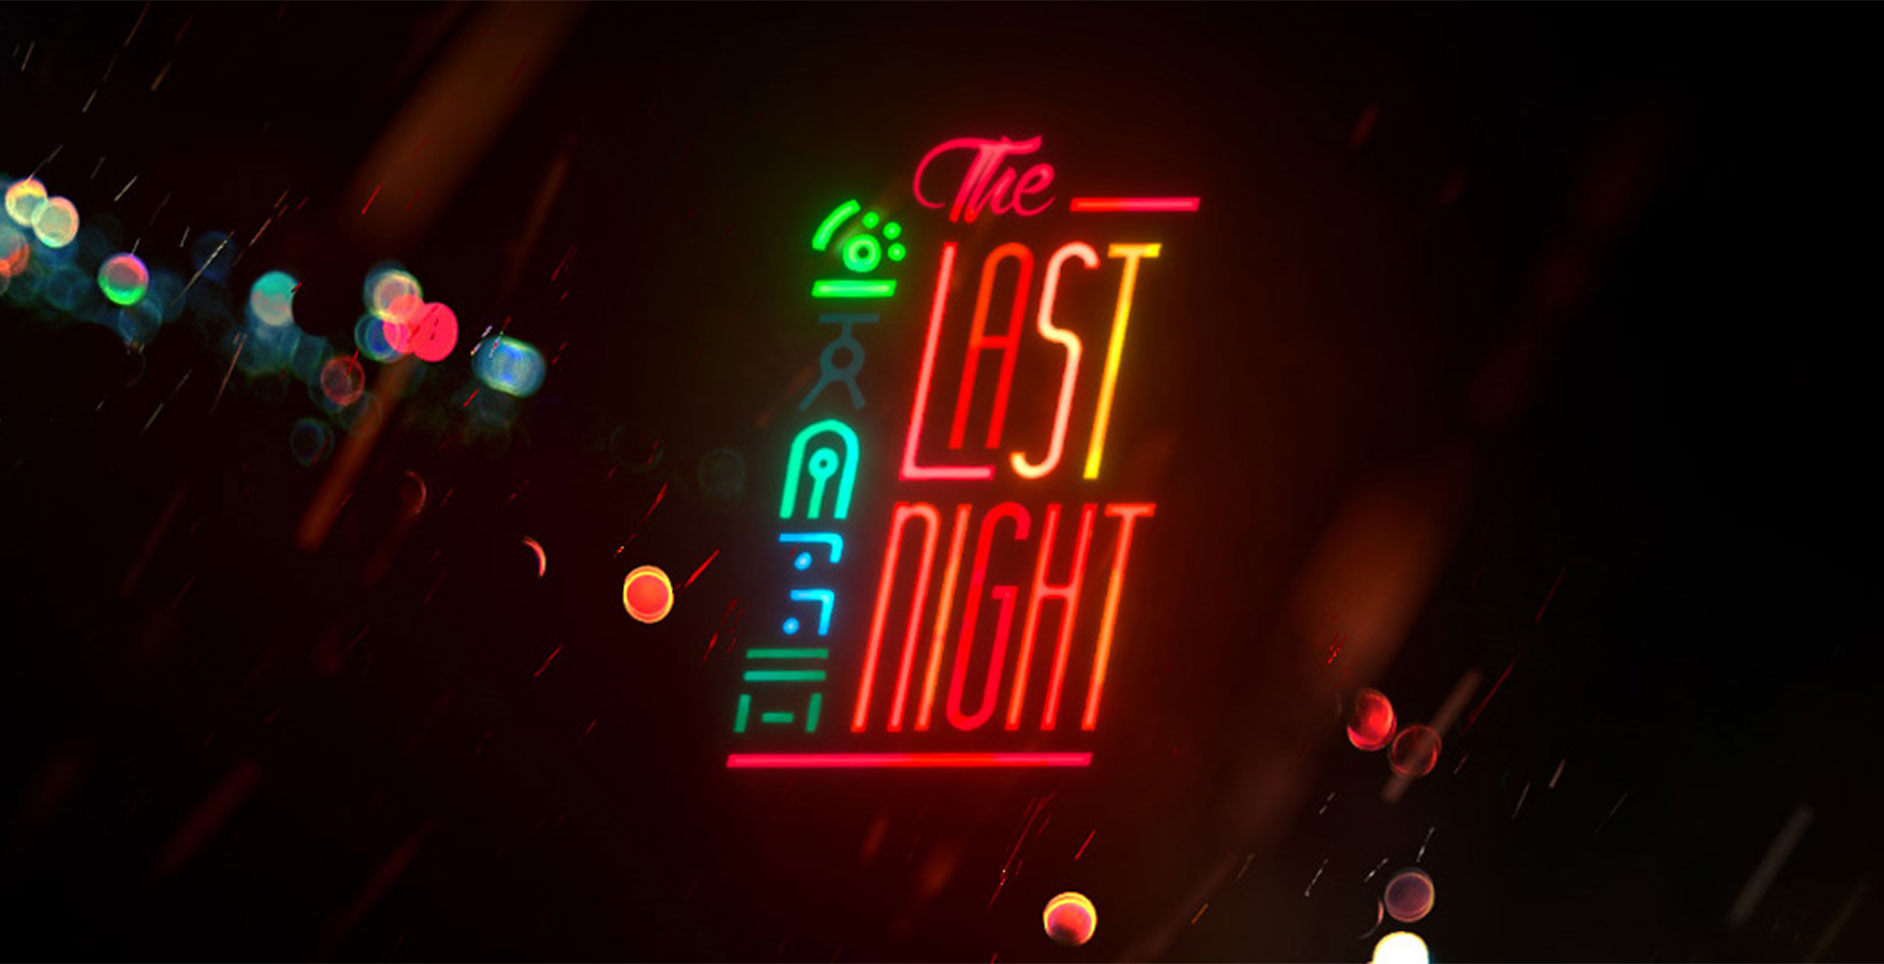 What did you watch last night. The last Night (2021). The last Night игра. The last Night игра обложка. Зе ласт Найт.